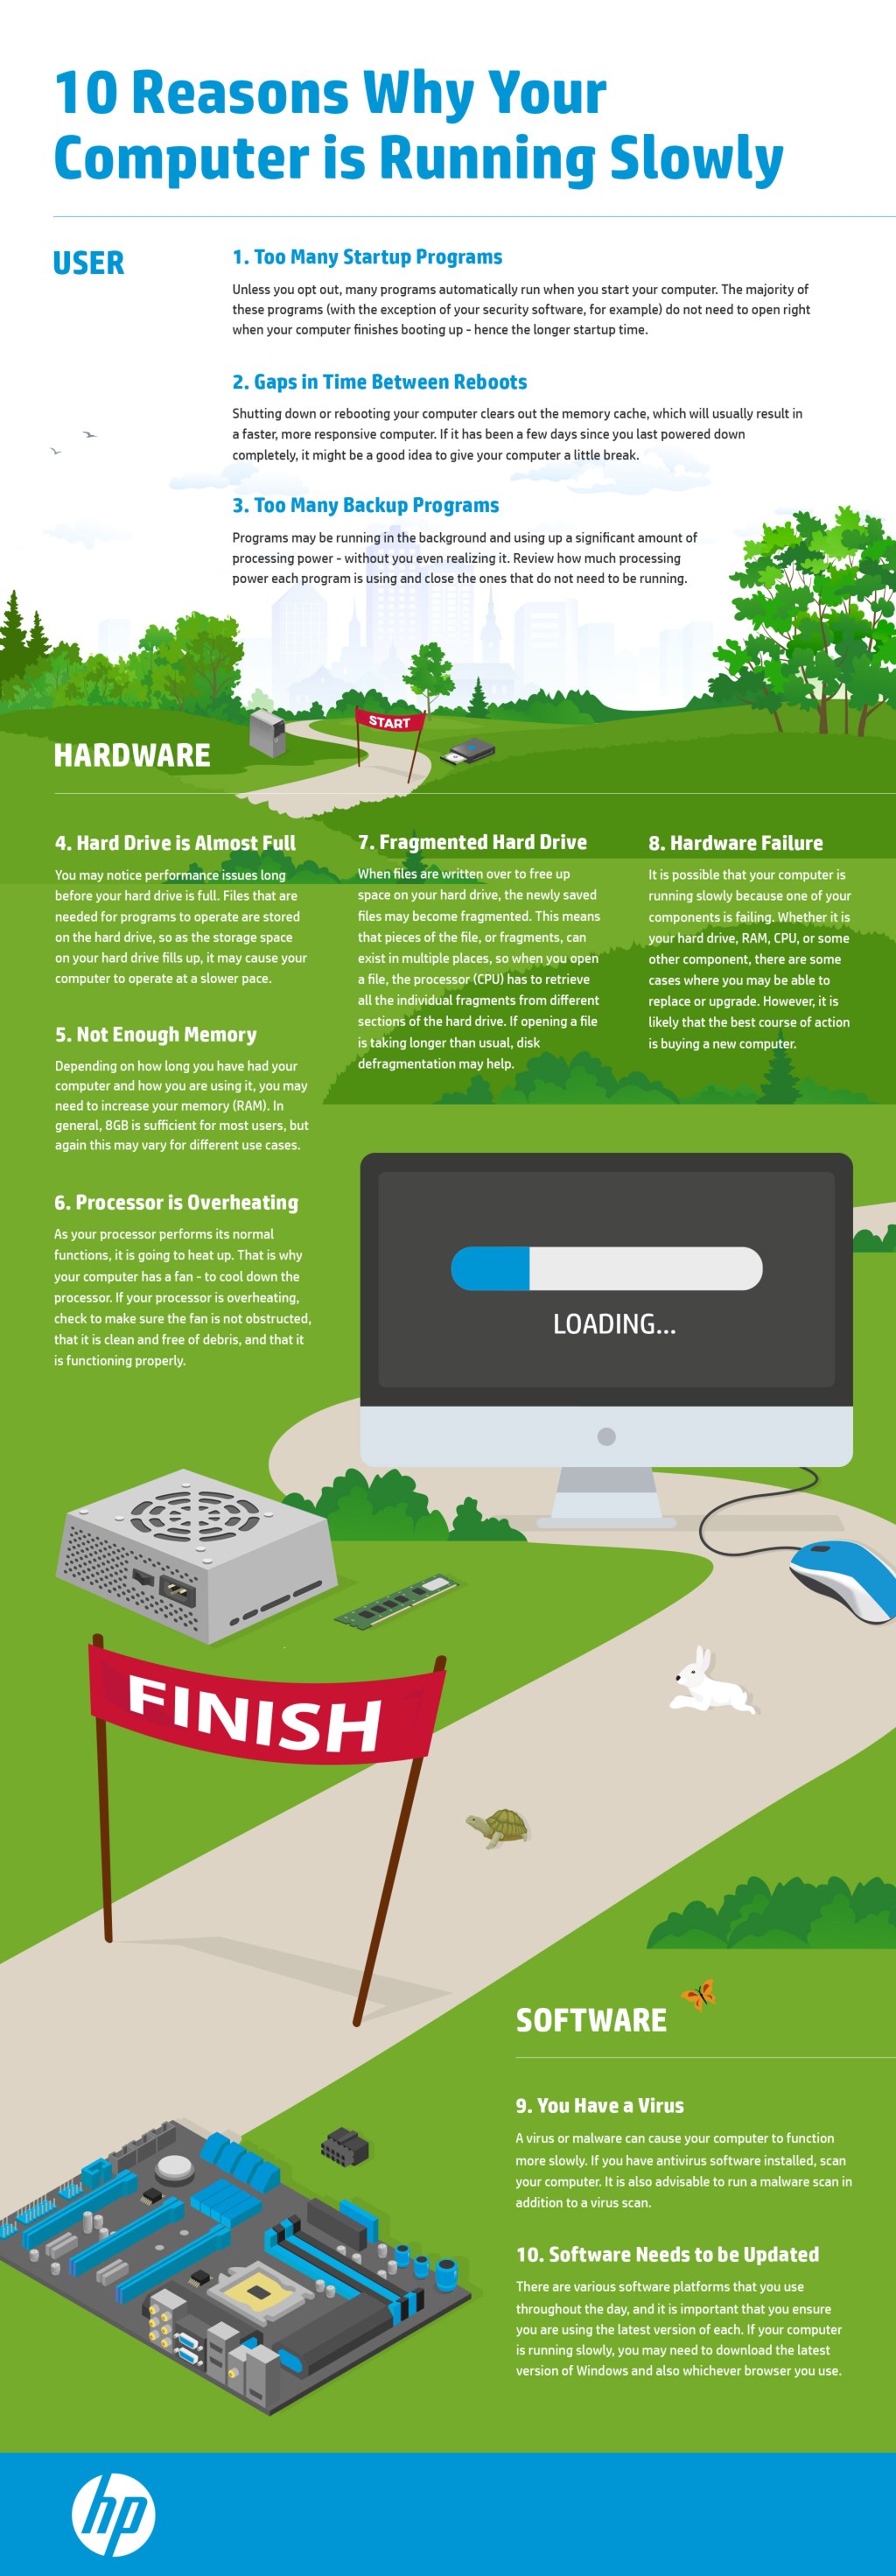 desktop pc running slow - Reasons Why Your Computer is Running Slowly (Infographic)